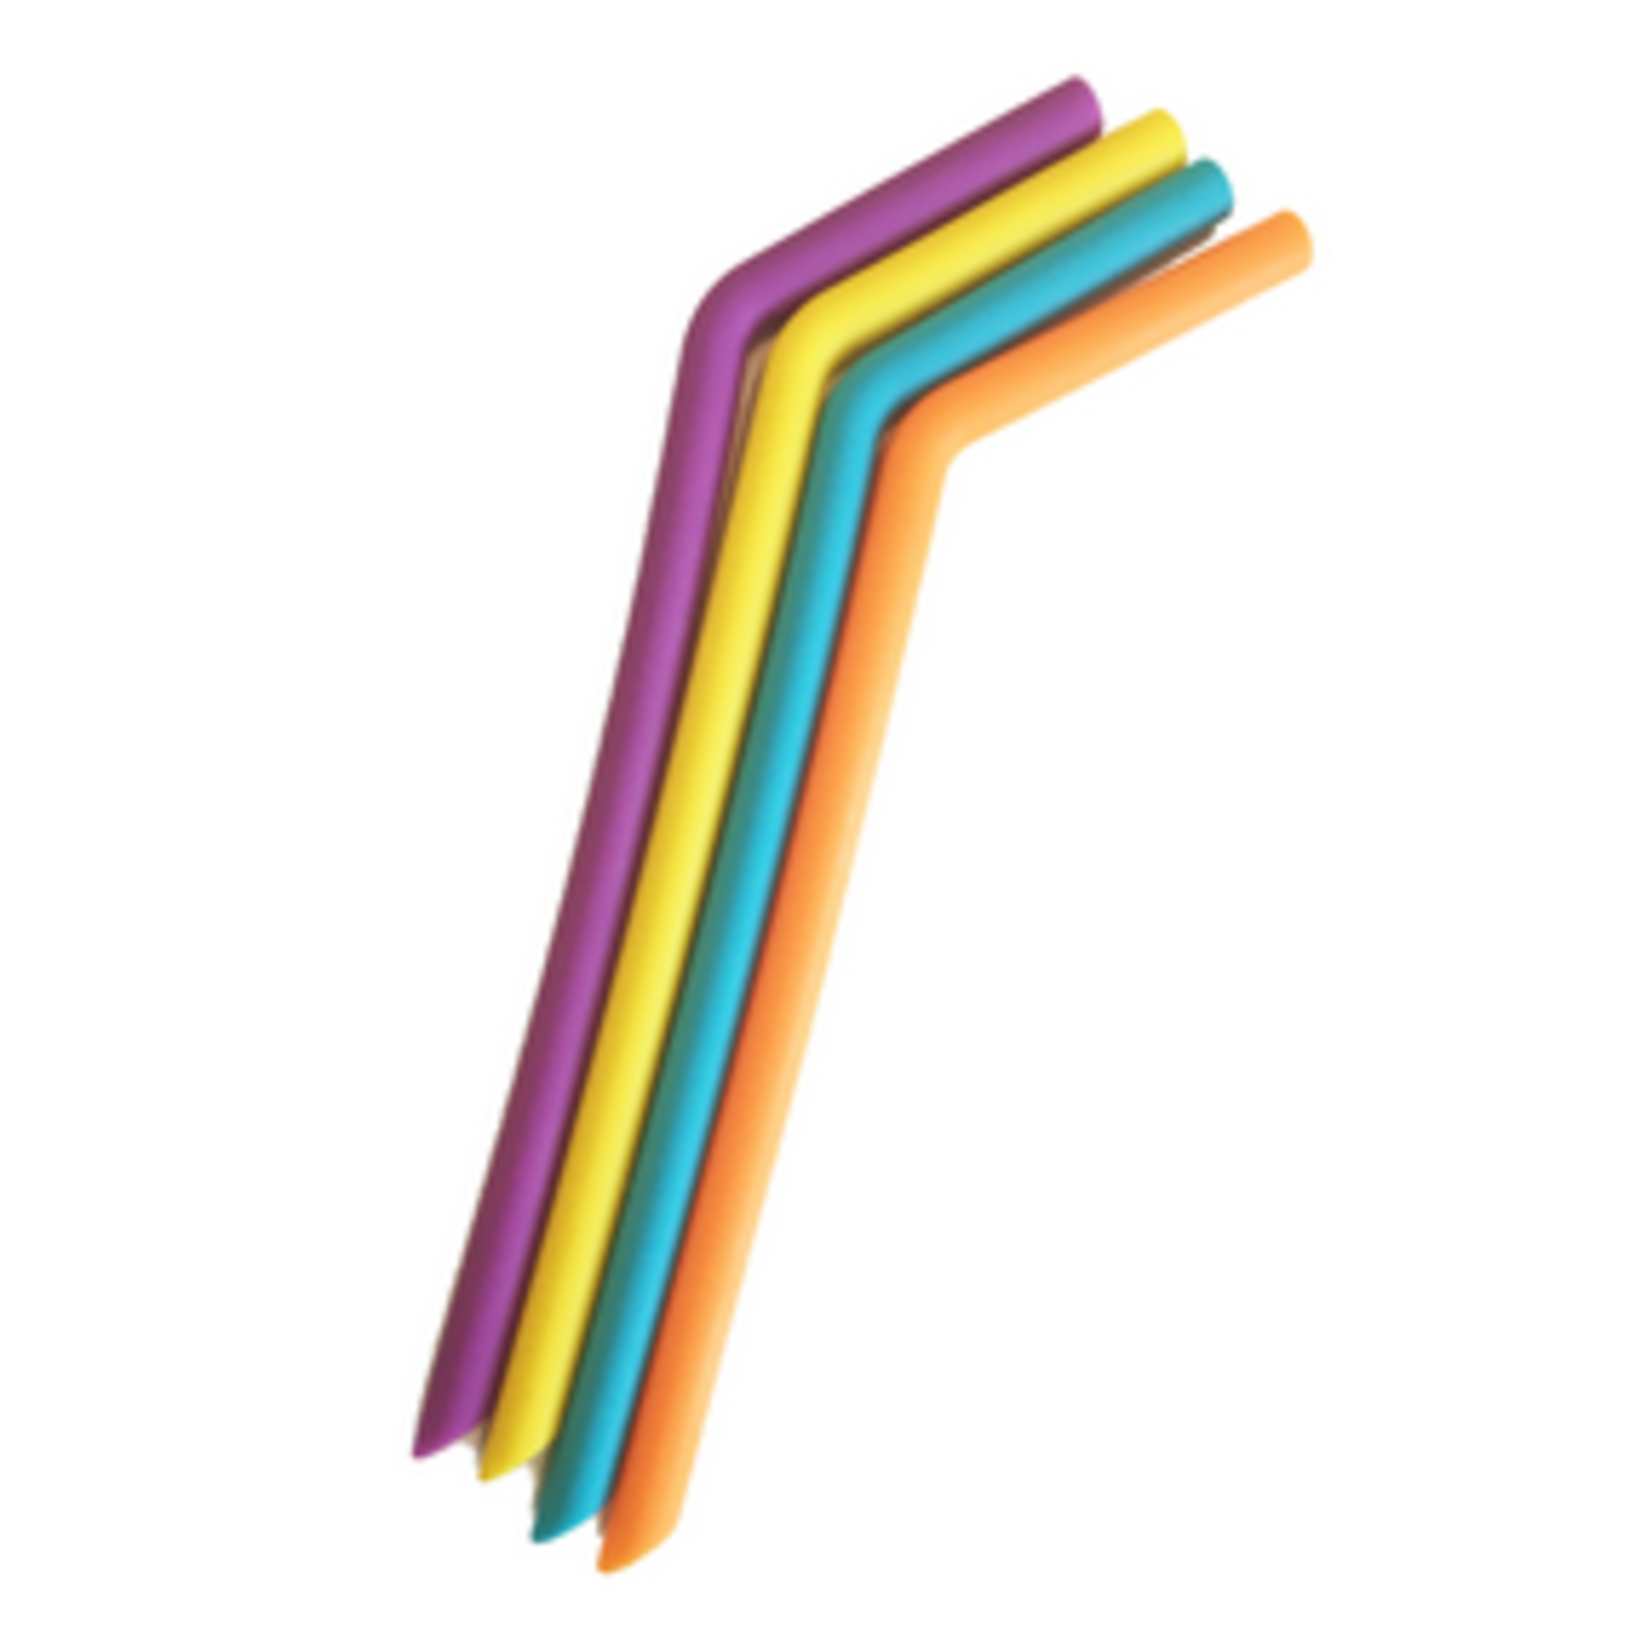 THE LAST STRAW THE LAST STRAW - SILICONE STRAWS (ASSORTED)